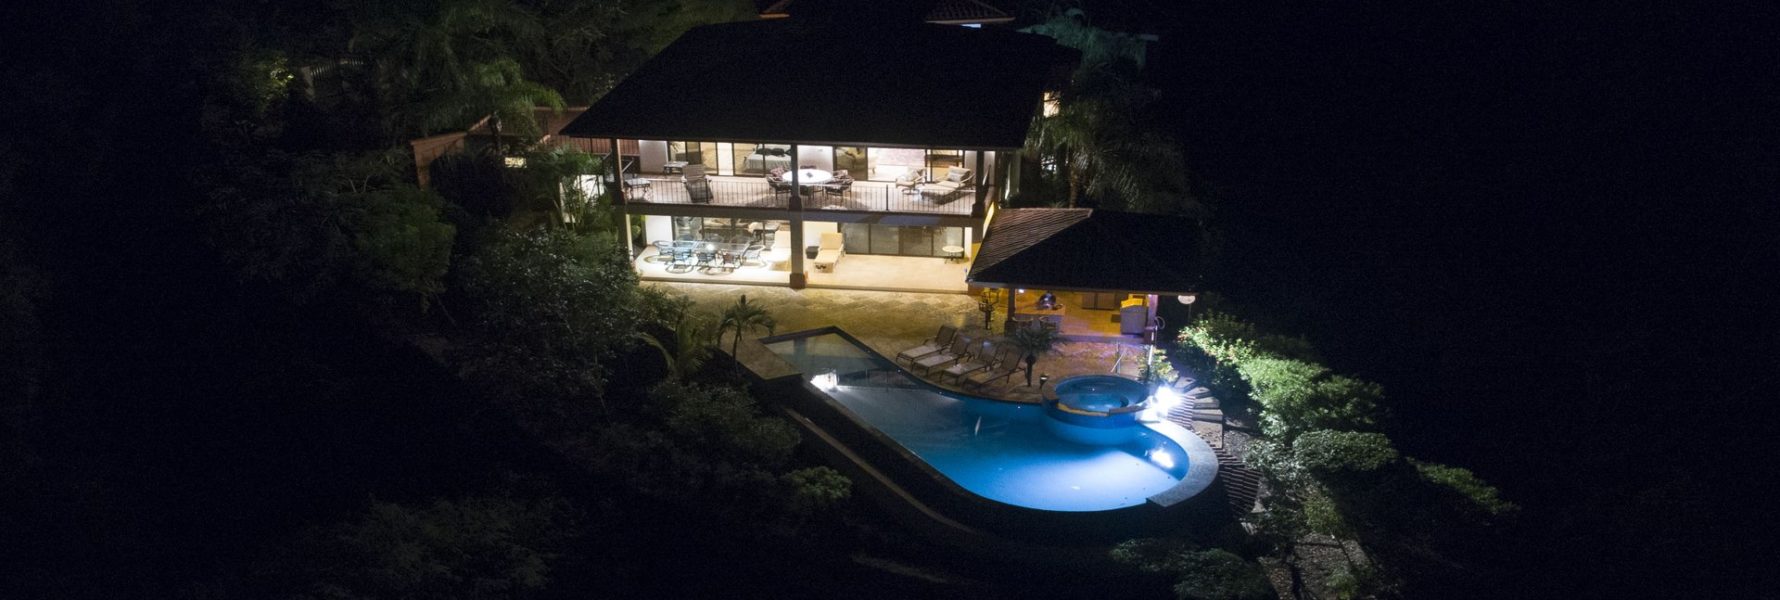 Imagine gazing at the stars at night from this luxury villa in Play Flamingo surrounded by the tropical rainforest.